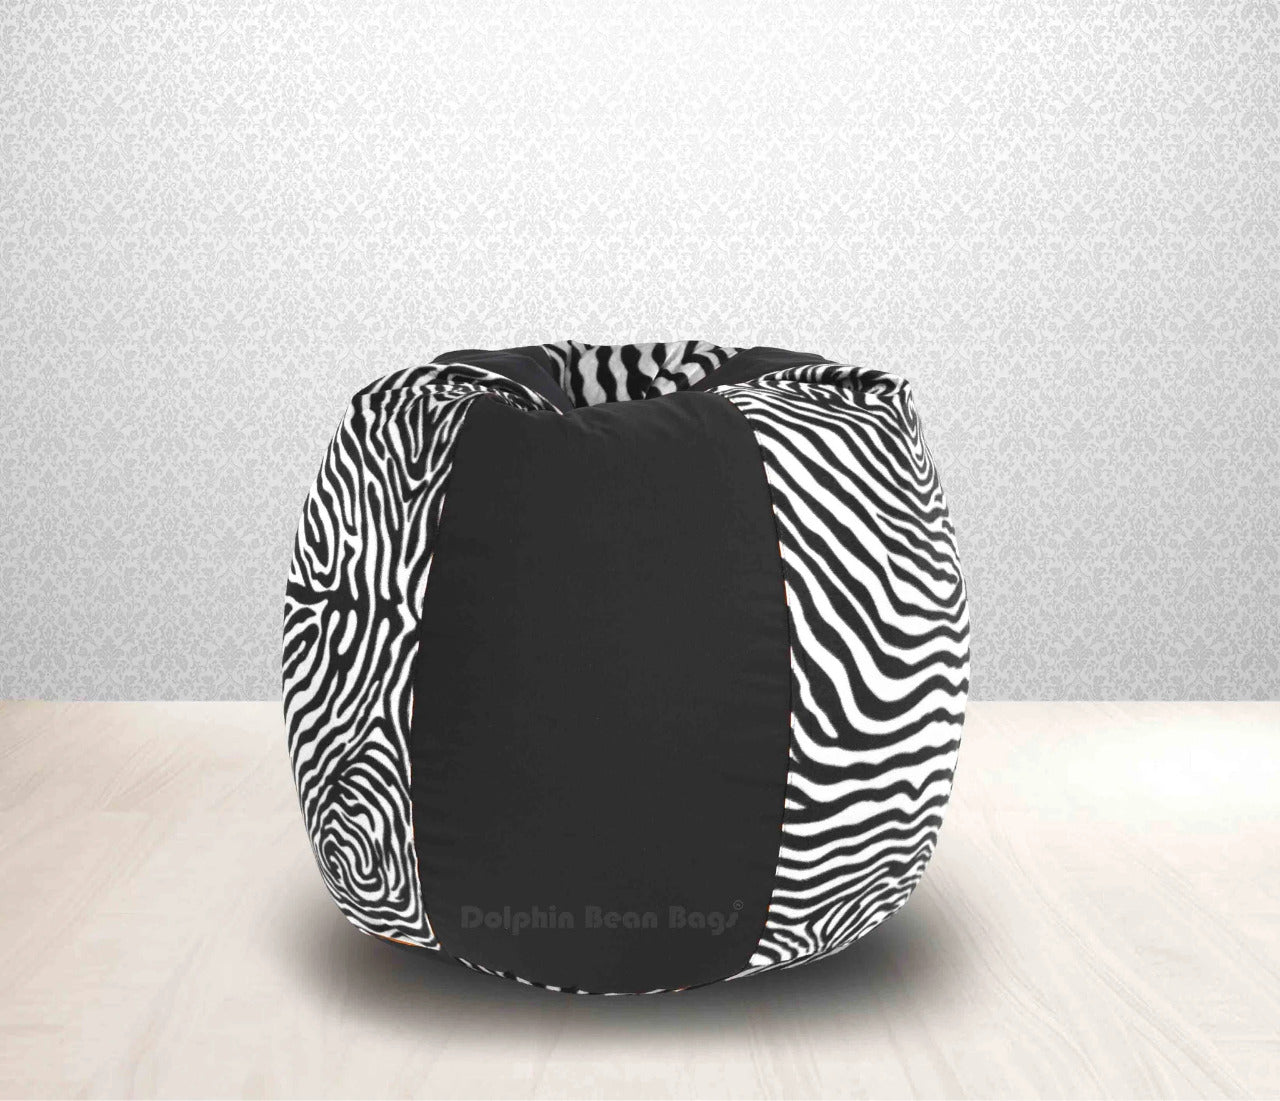 Bean bag : XL Black Zebra(Blk-White)-FABRIC-COVERS(without Beans)